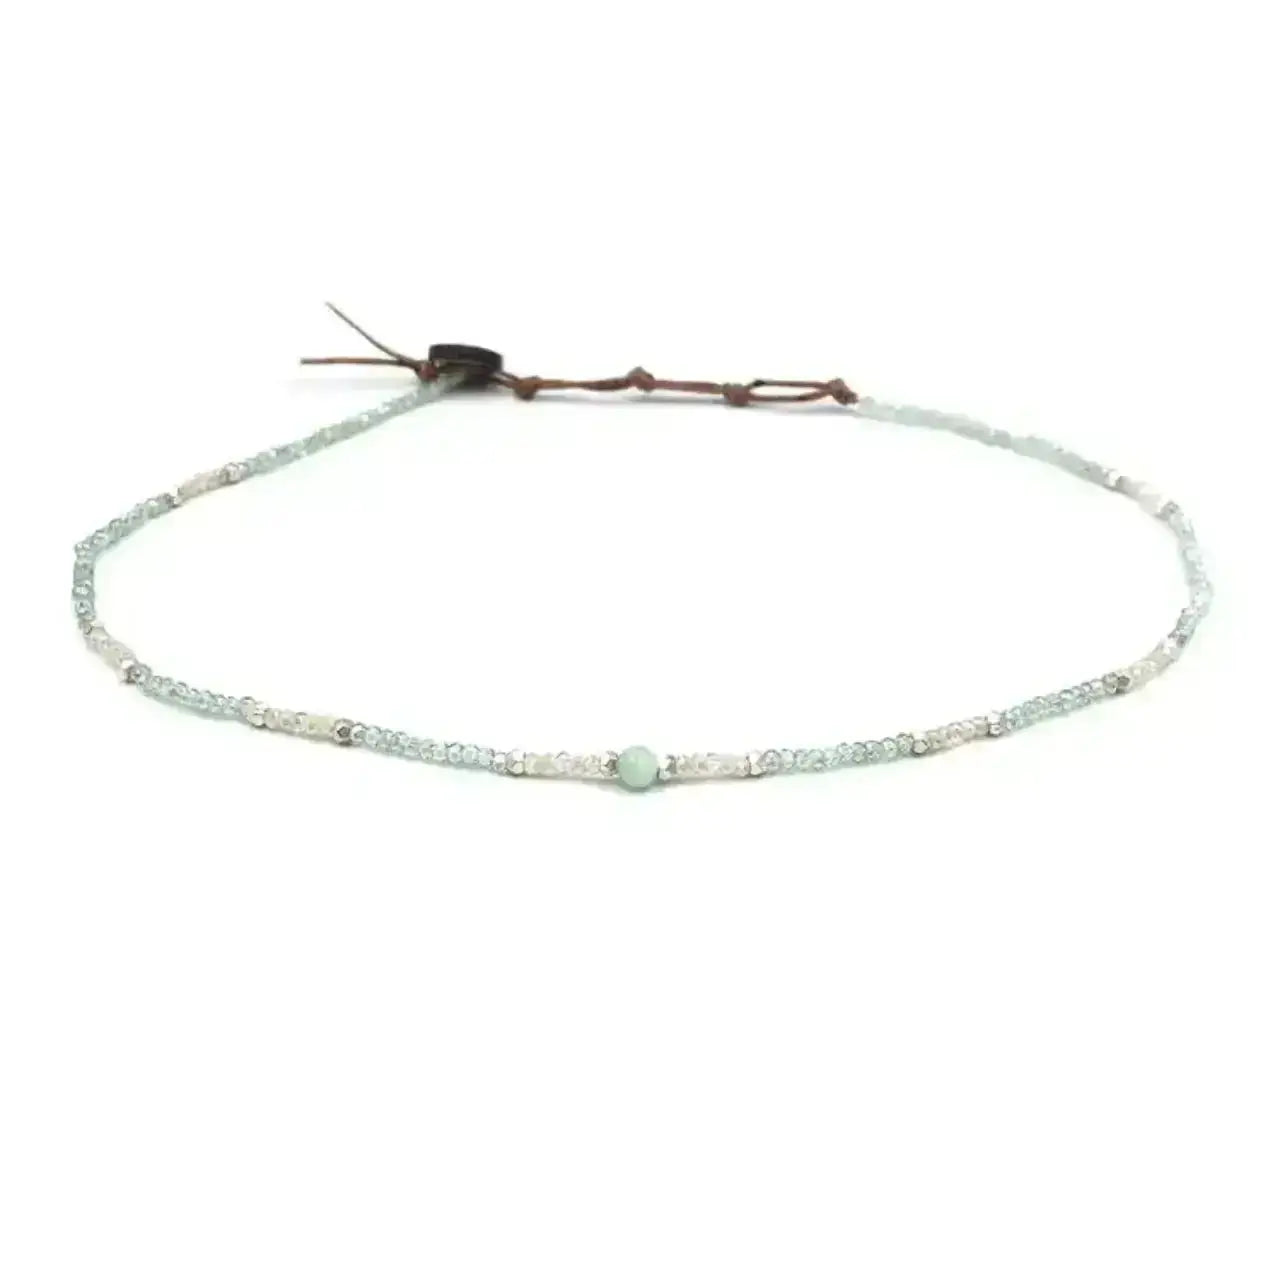 Green Amazonite Bead Necklace with Crystal Stone Accents